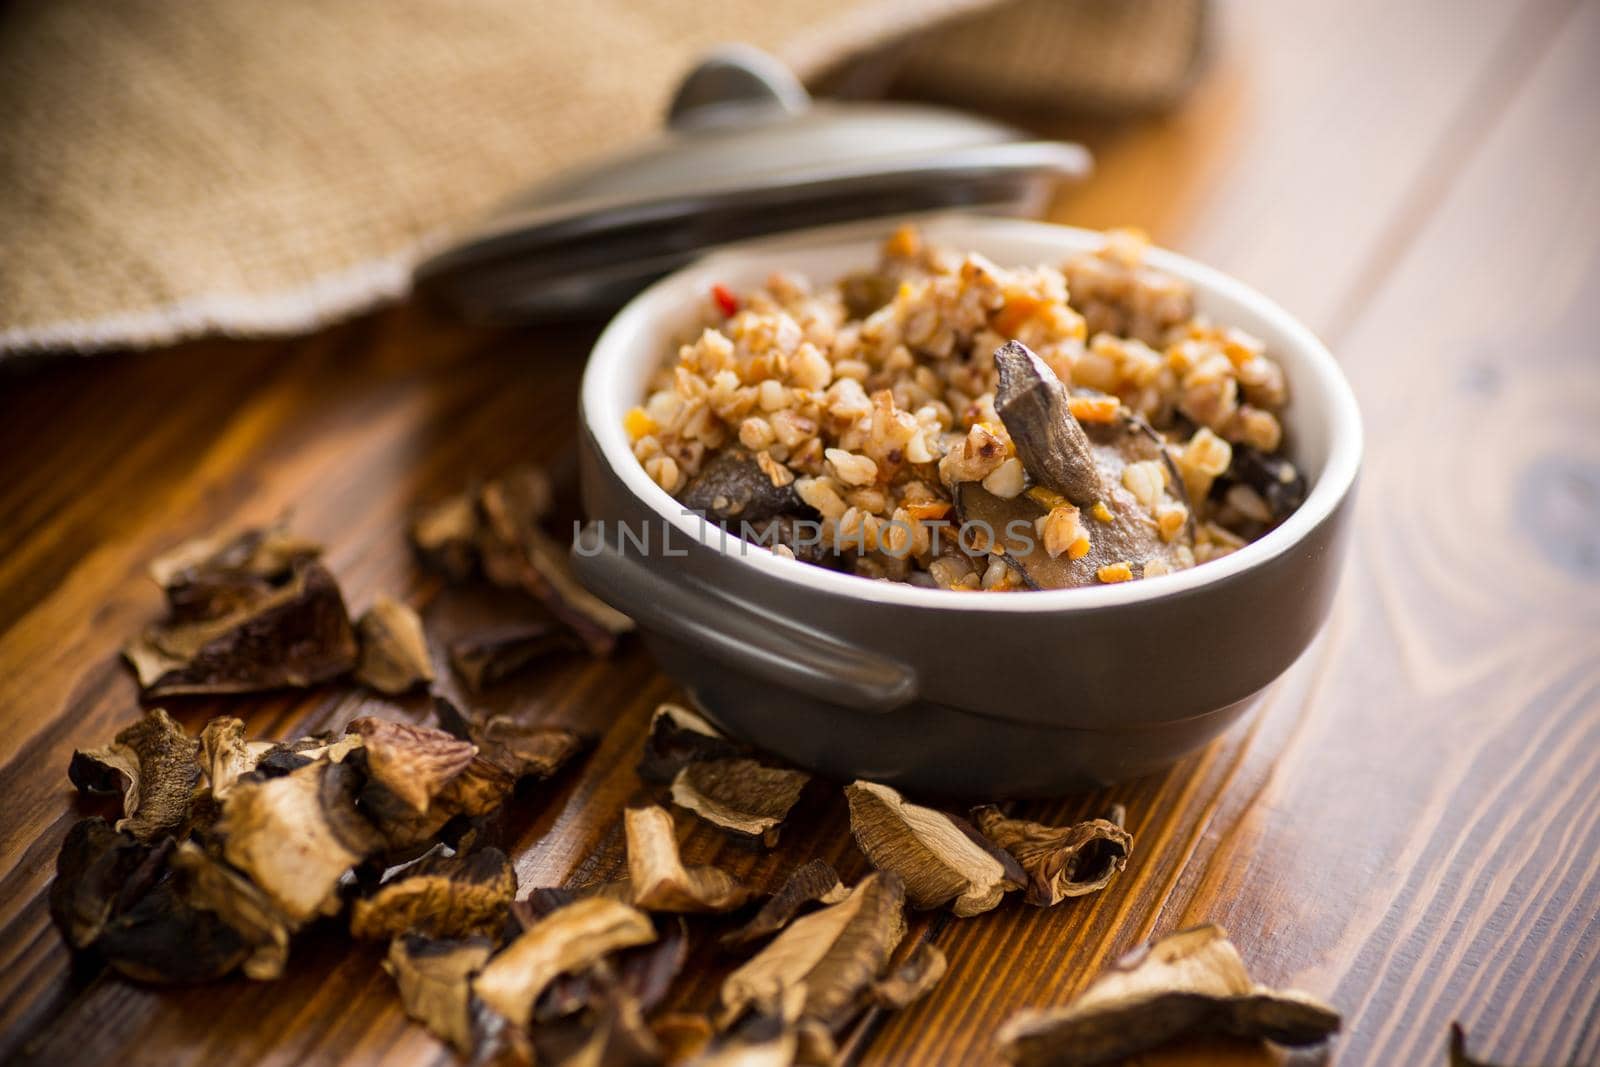 boiled buckwheat with organic forest dried mushrooms in a ceramic bowl on a wooden table